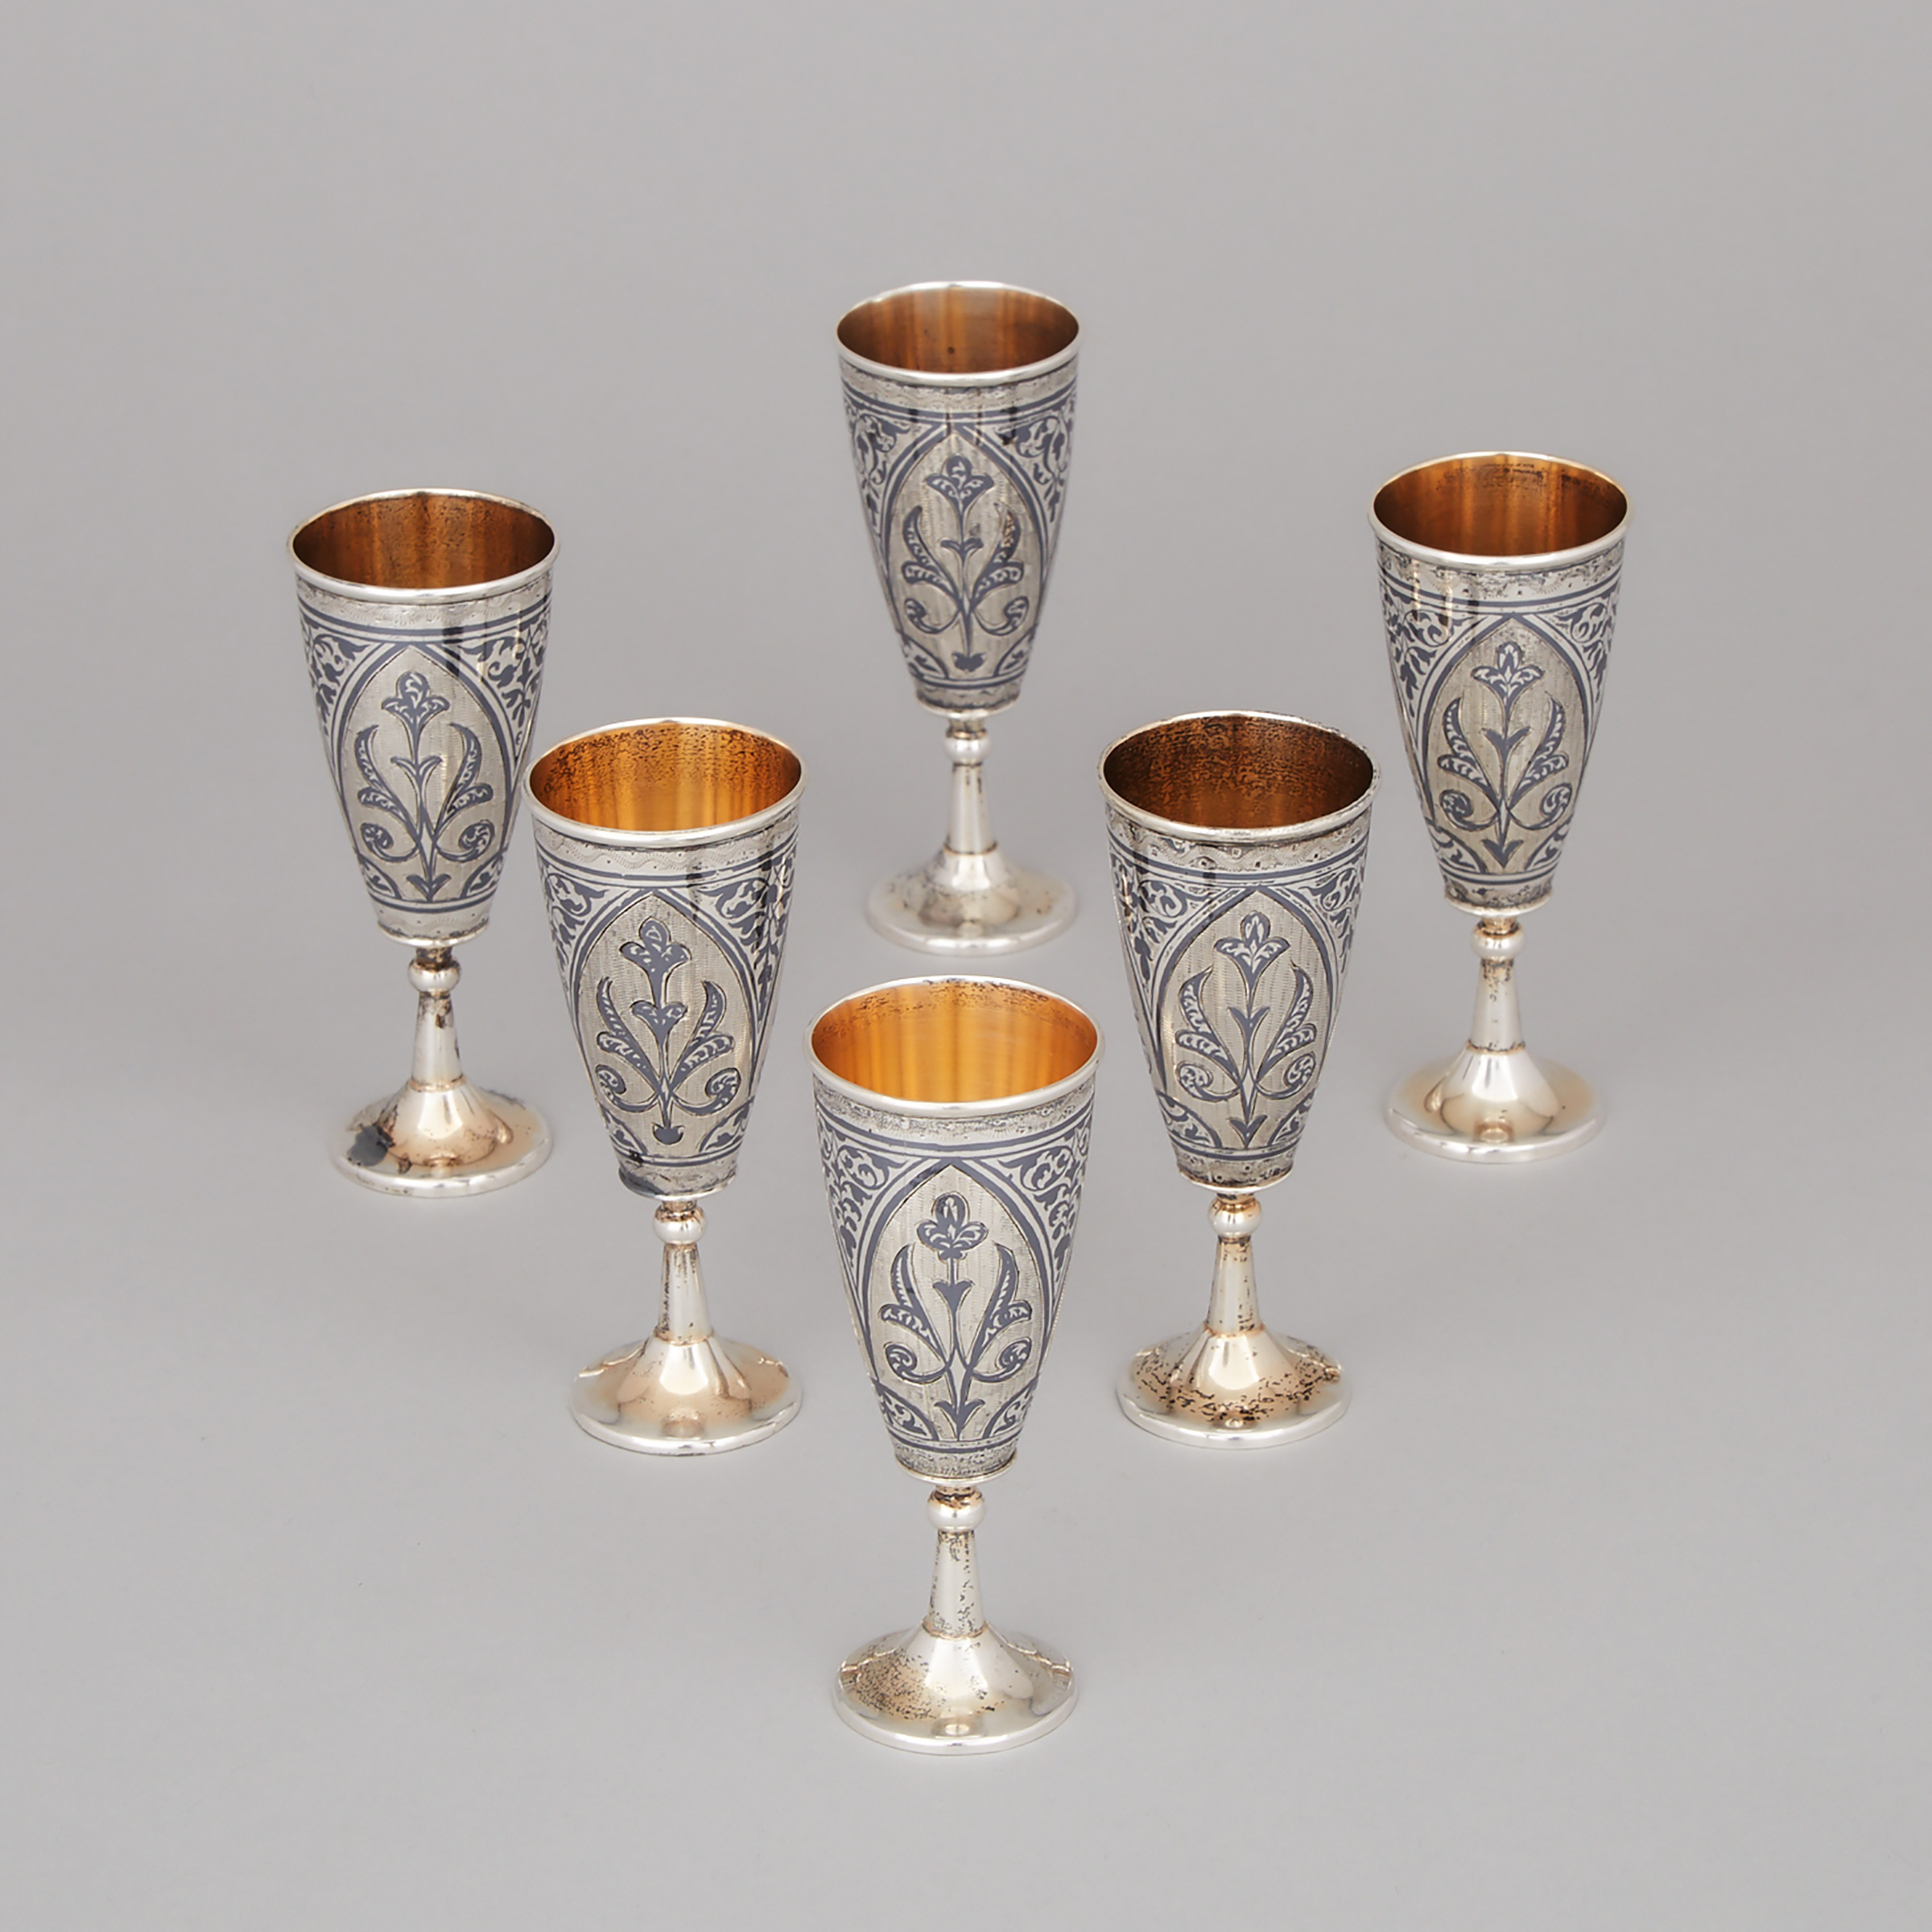 Six Caucasian Nielloed Silver Small Goblets, early 20th century